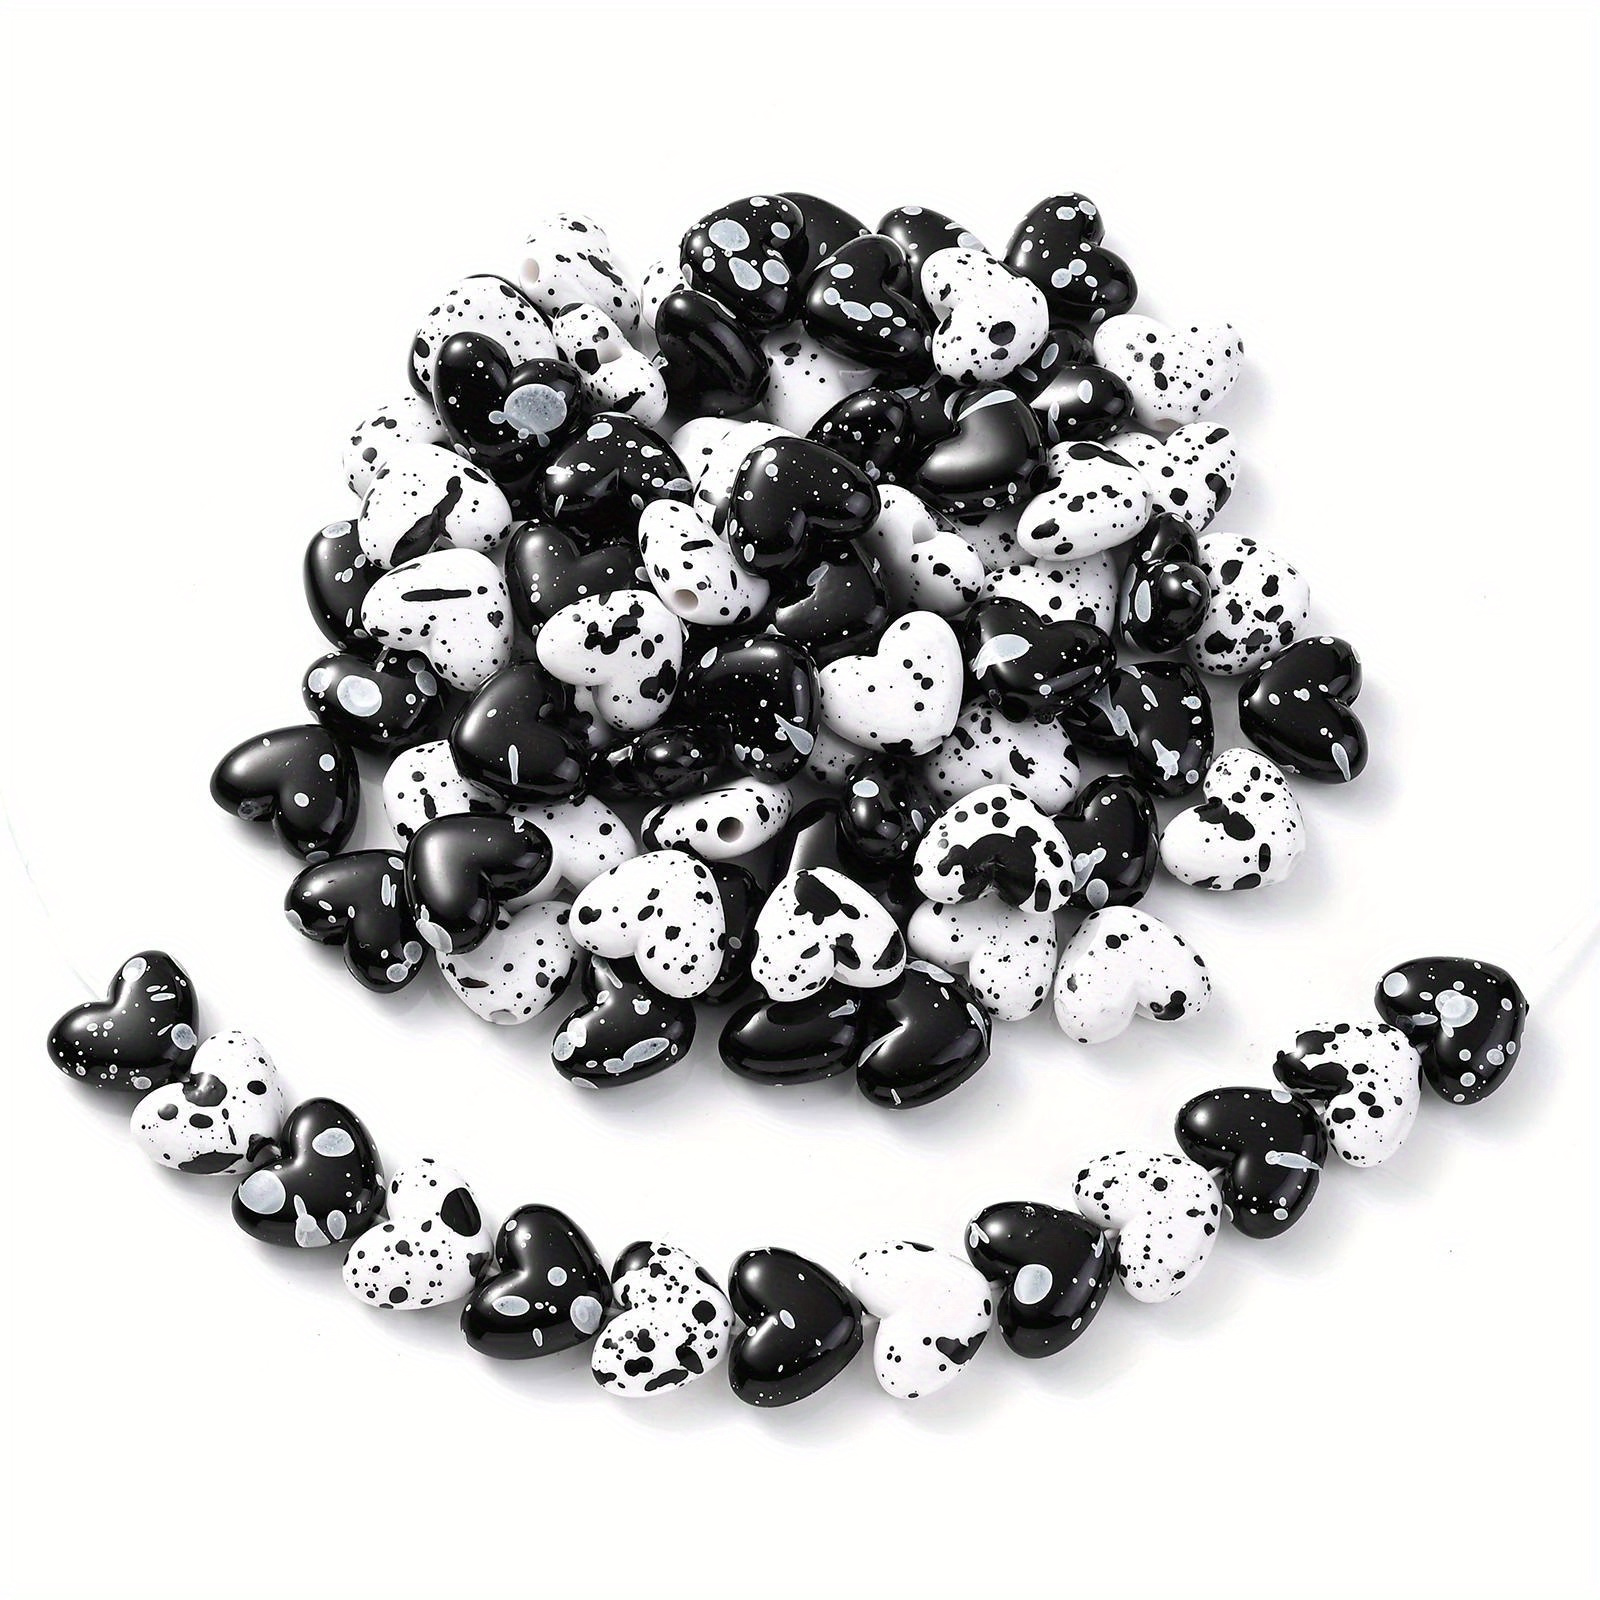 

30pcs Classic White Black Peach Heart Love Beads For Jewelry Making Fashion Diy Unique Spot Design Romantic Bracelet Necklace Valentine's Day Gifts